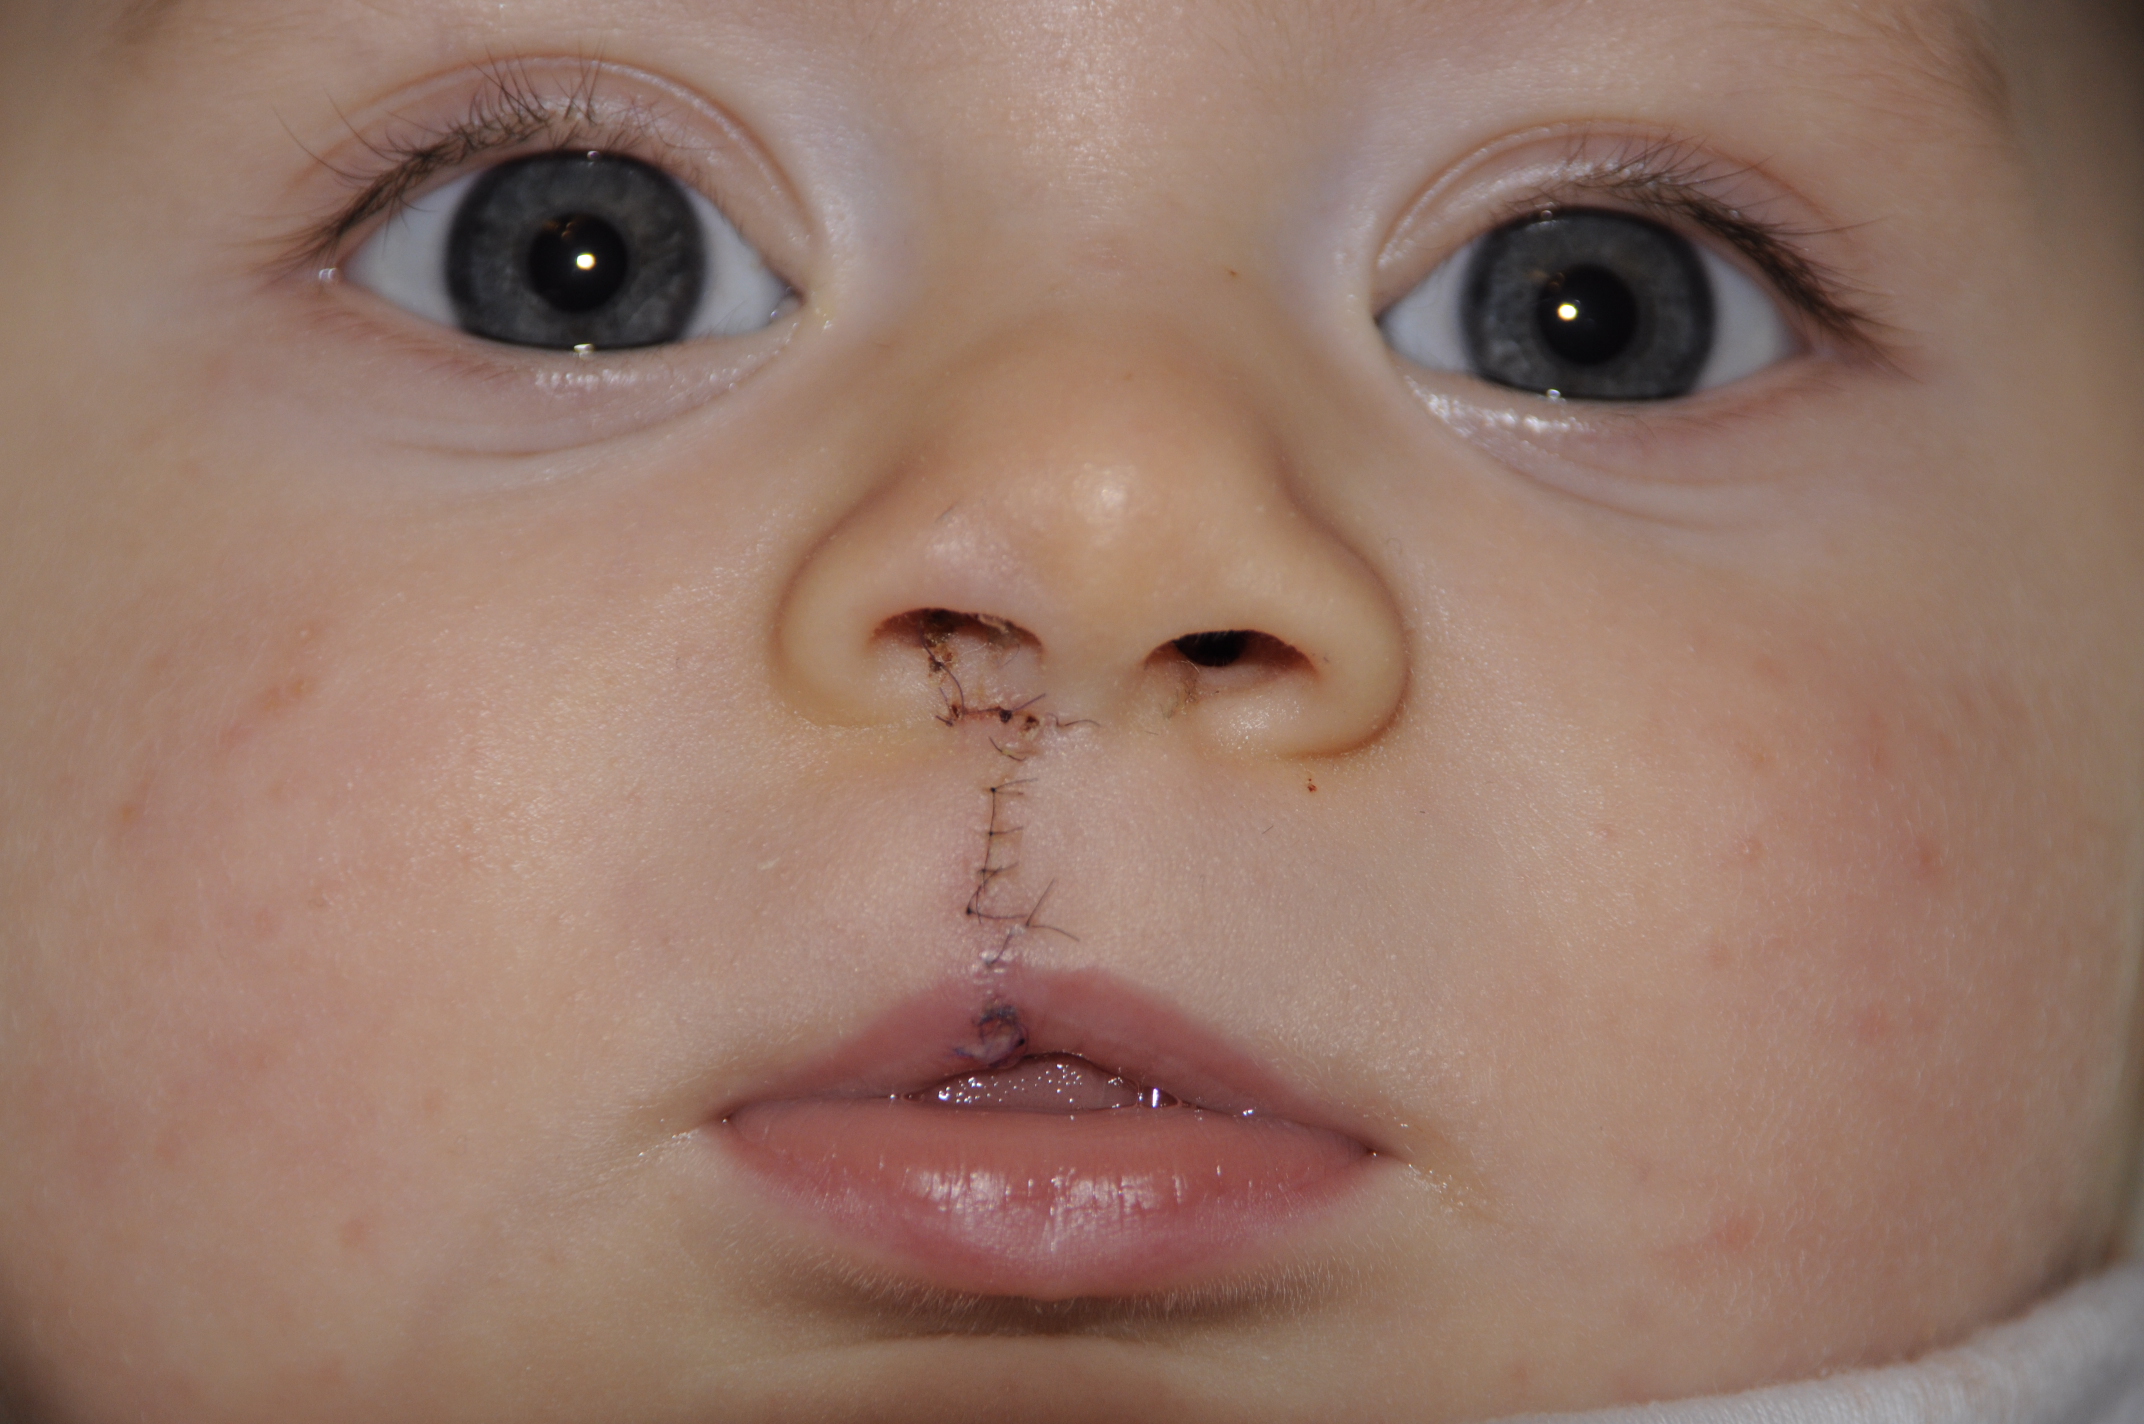 Cleft Lip and Cleft Palate Treatment in Iran